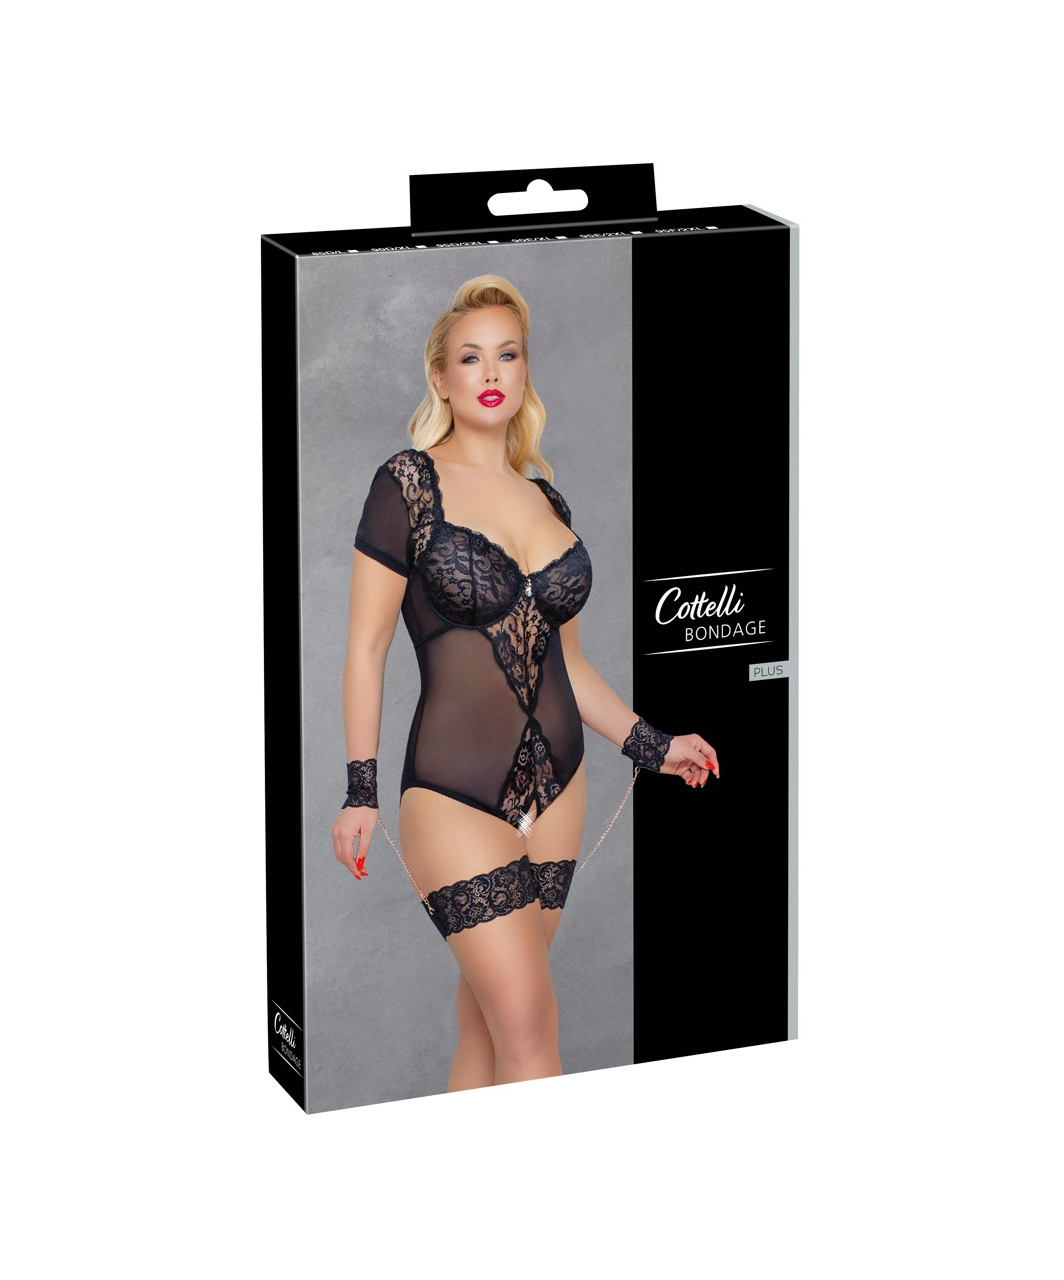 Cottelli Lingerie black sheer mesh crotchless bodysuit with wrist cuffs